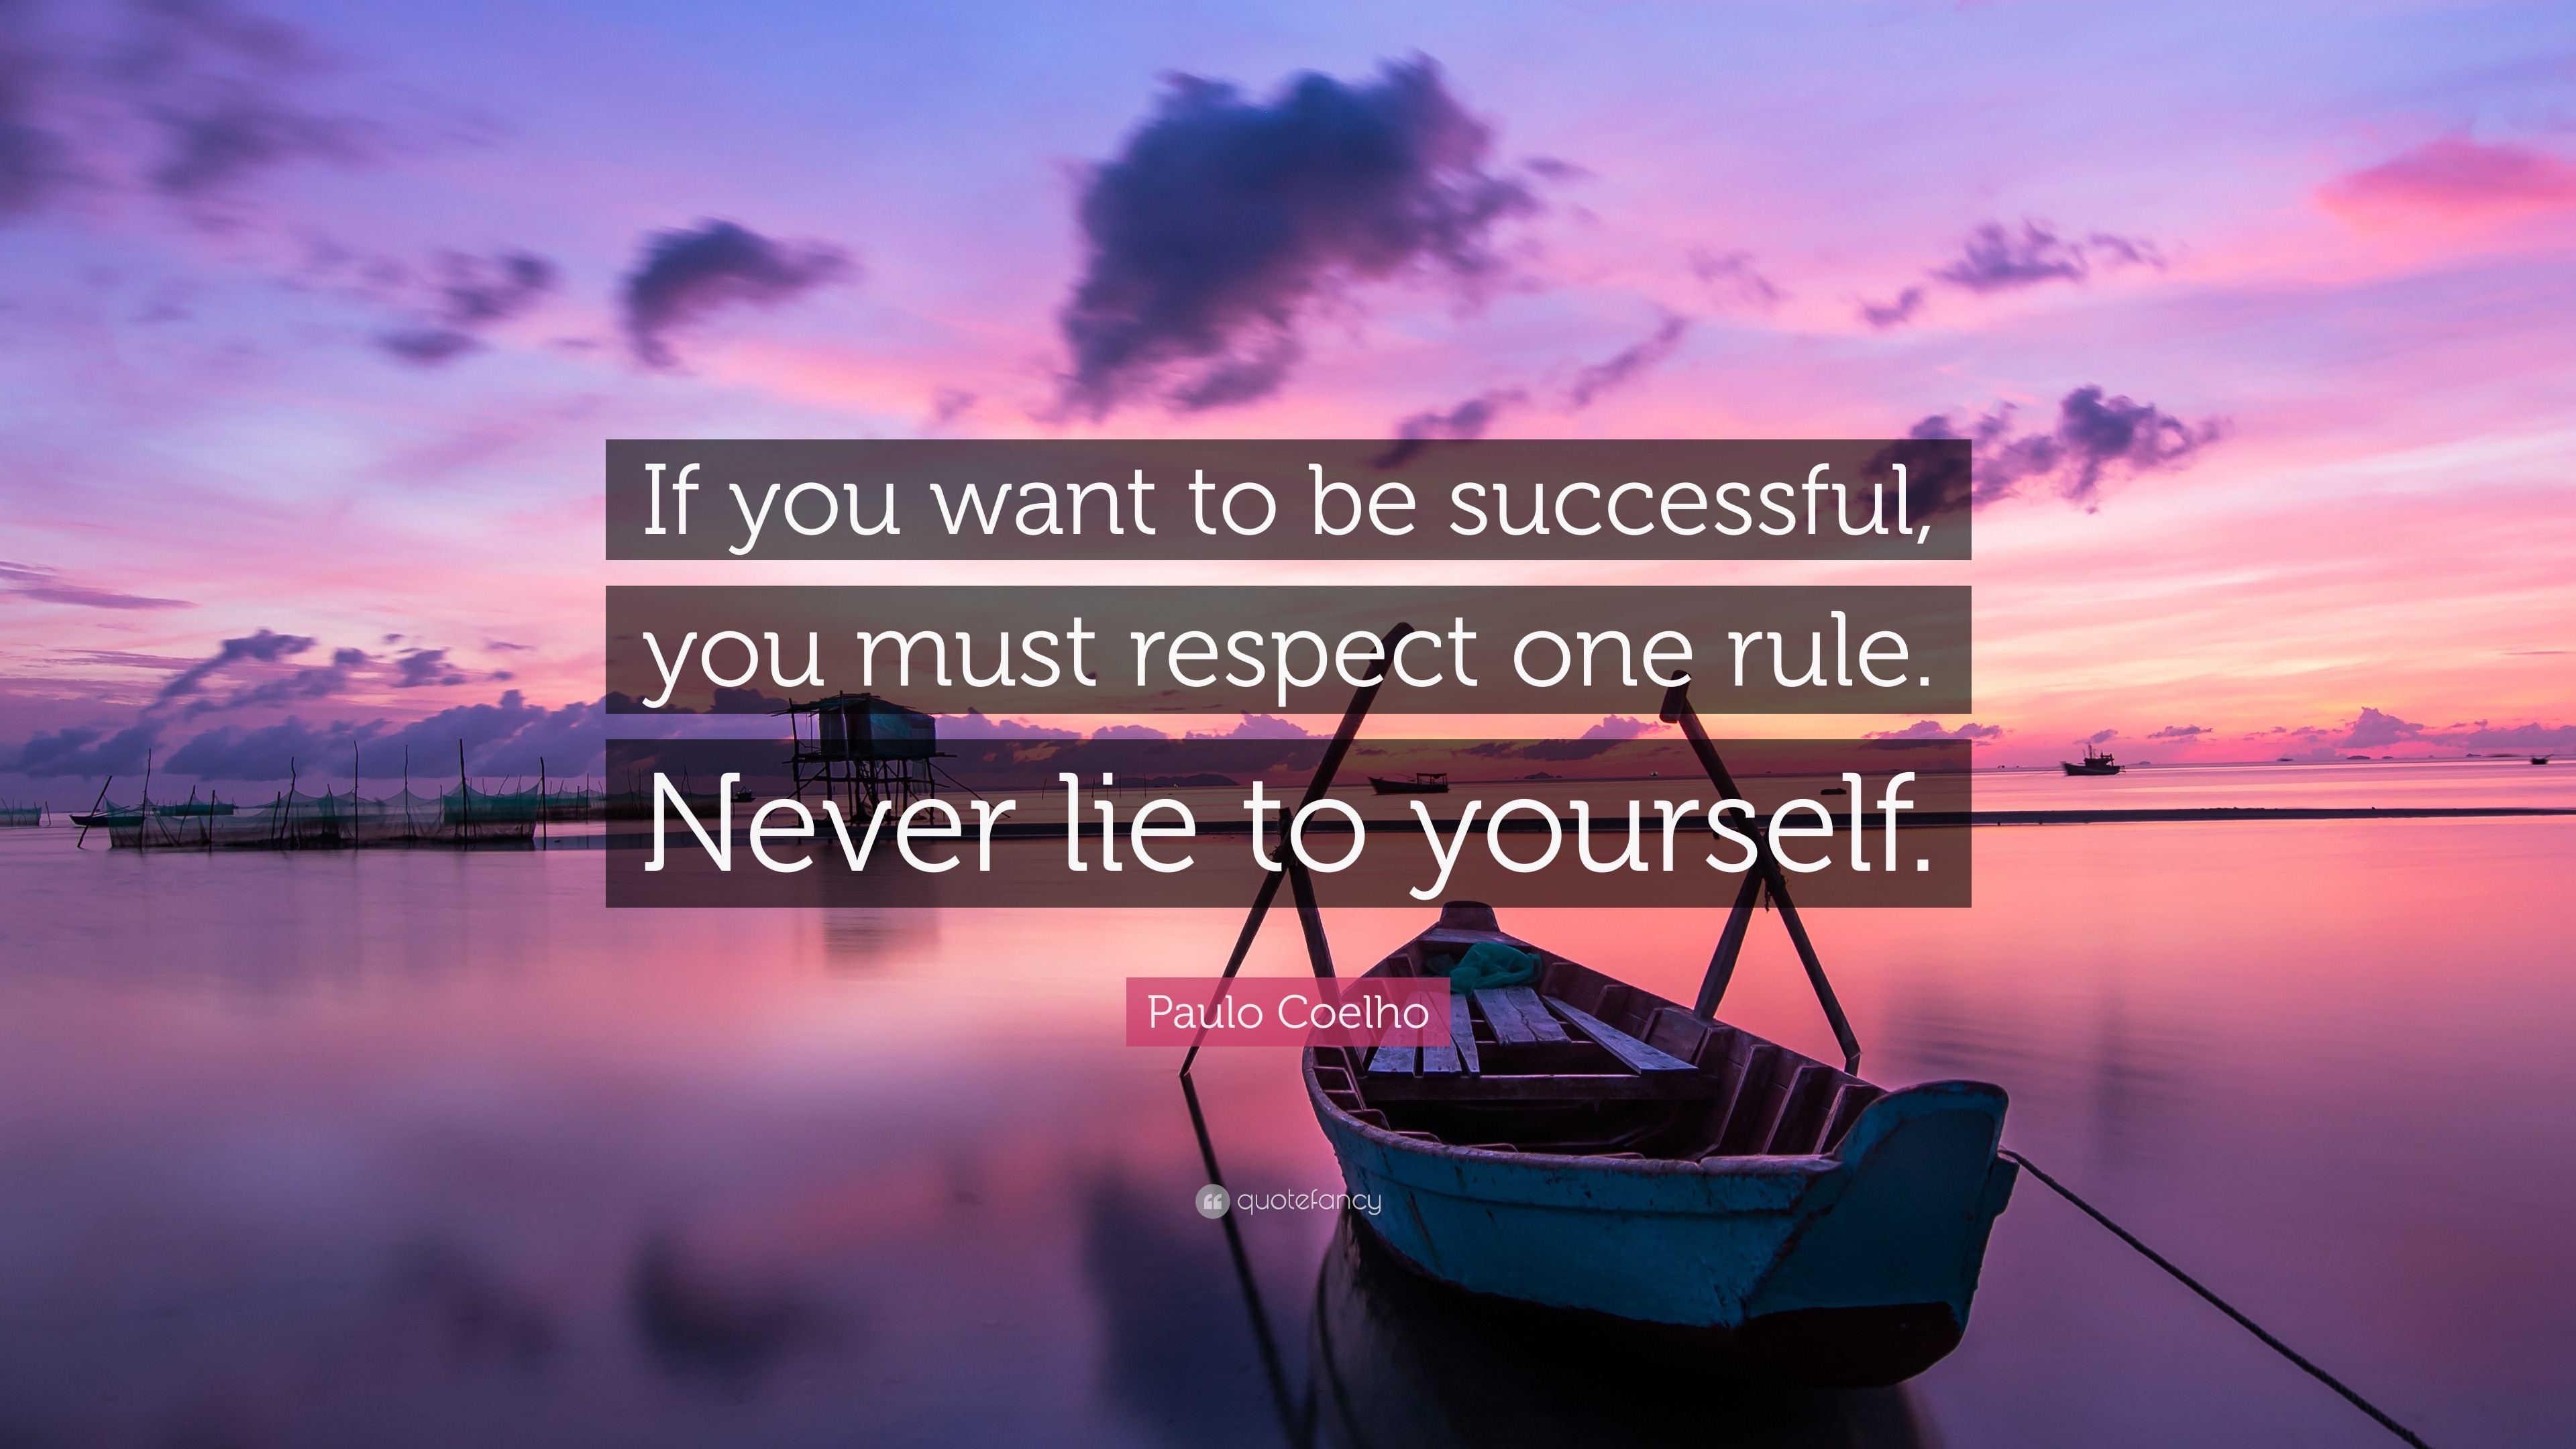 Paulo Coelho Quote: “If you want to be successful, you must respect one